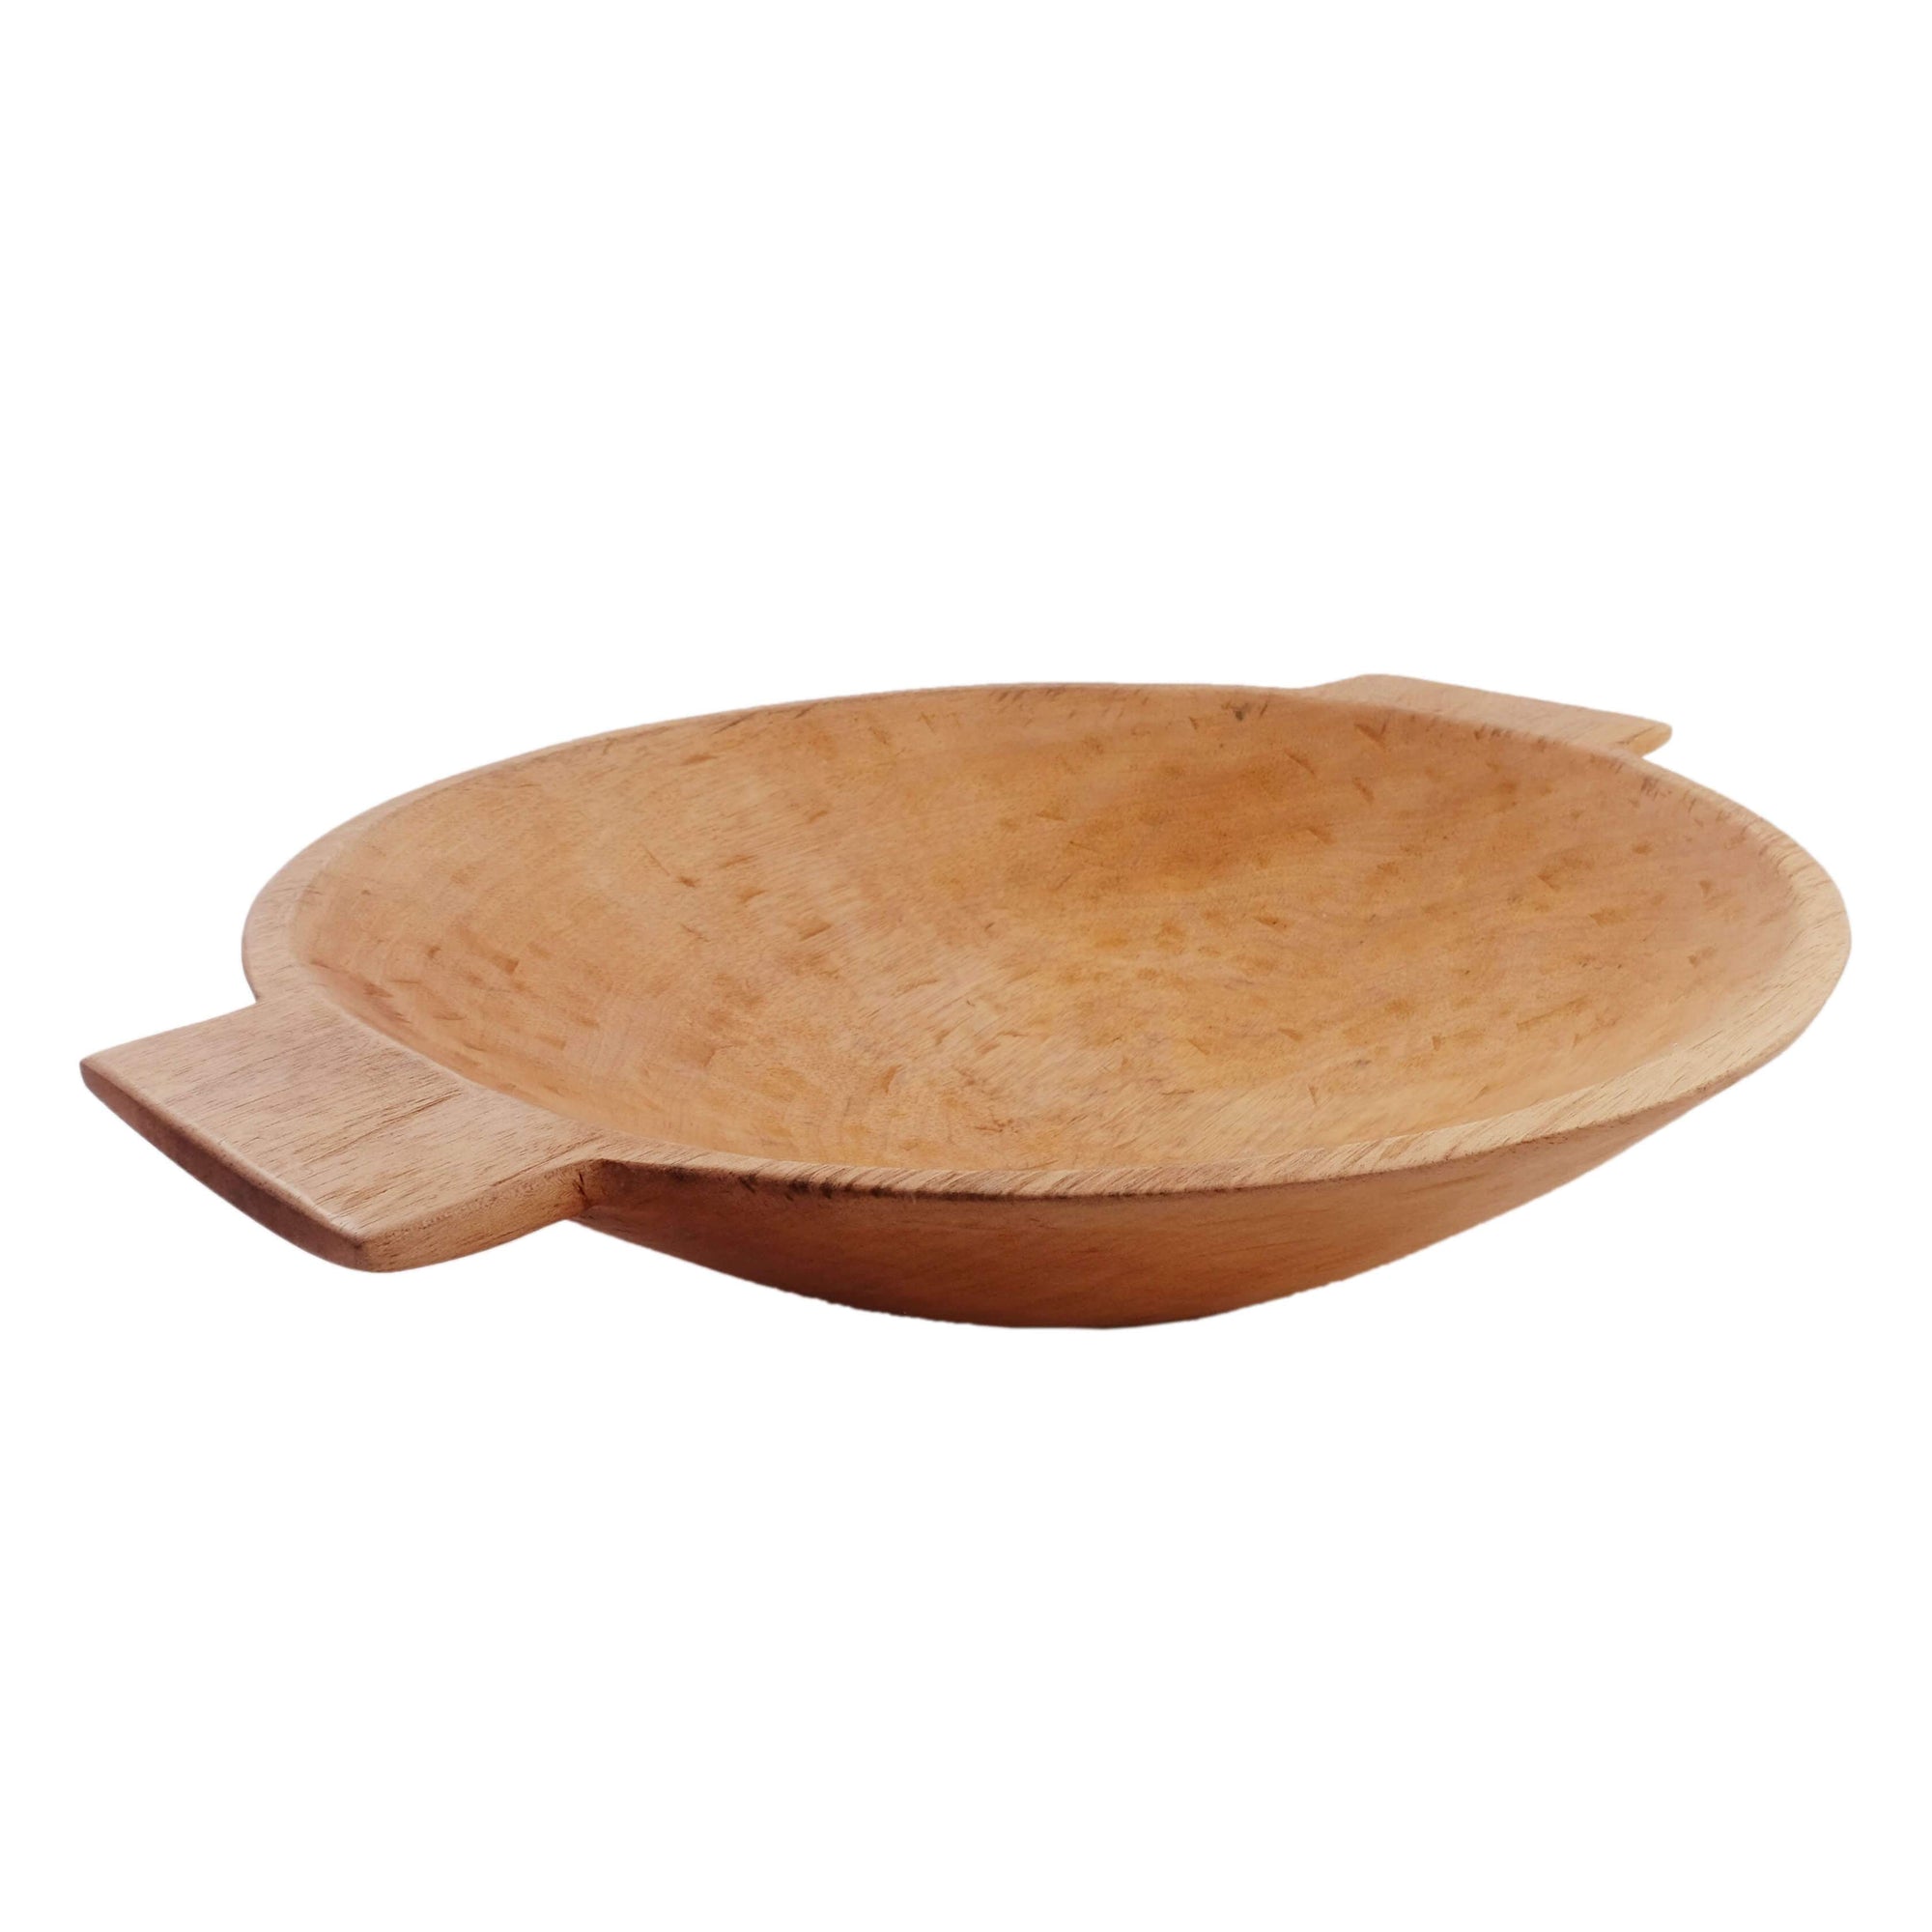 Large Wood Bowl with Handles - 19 inch